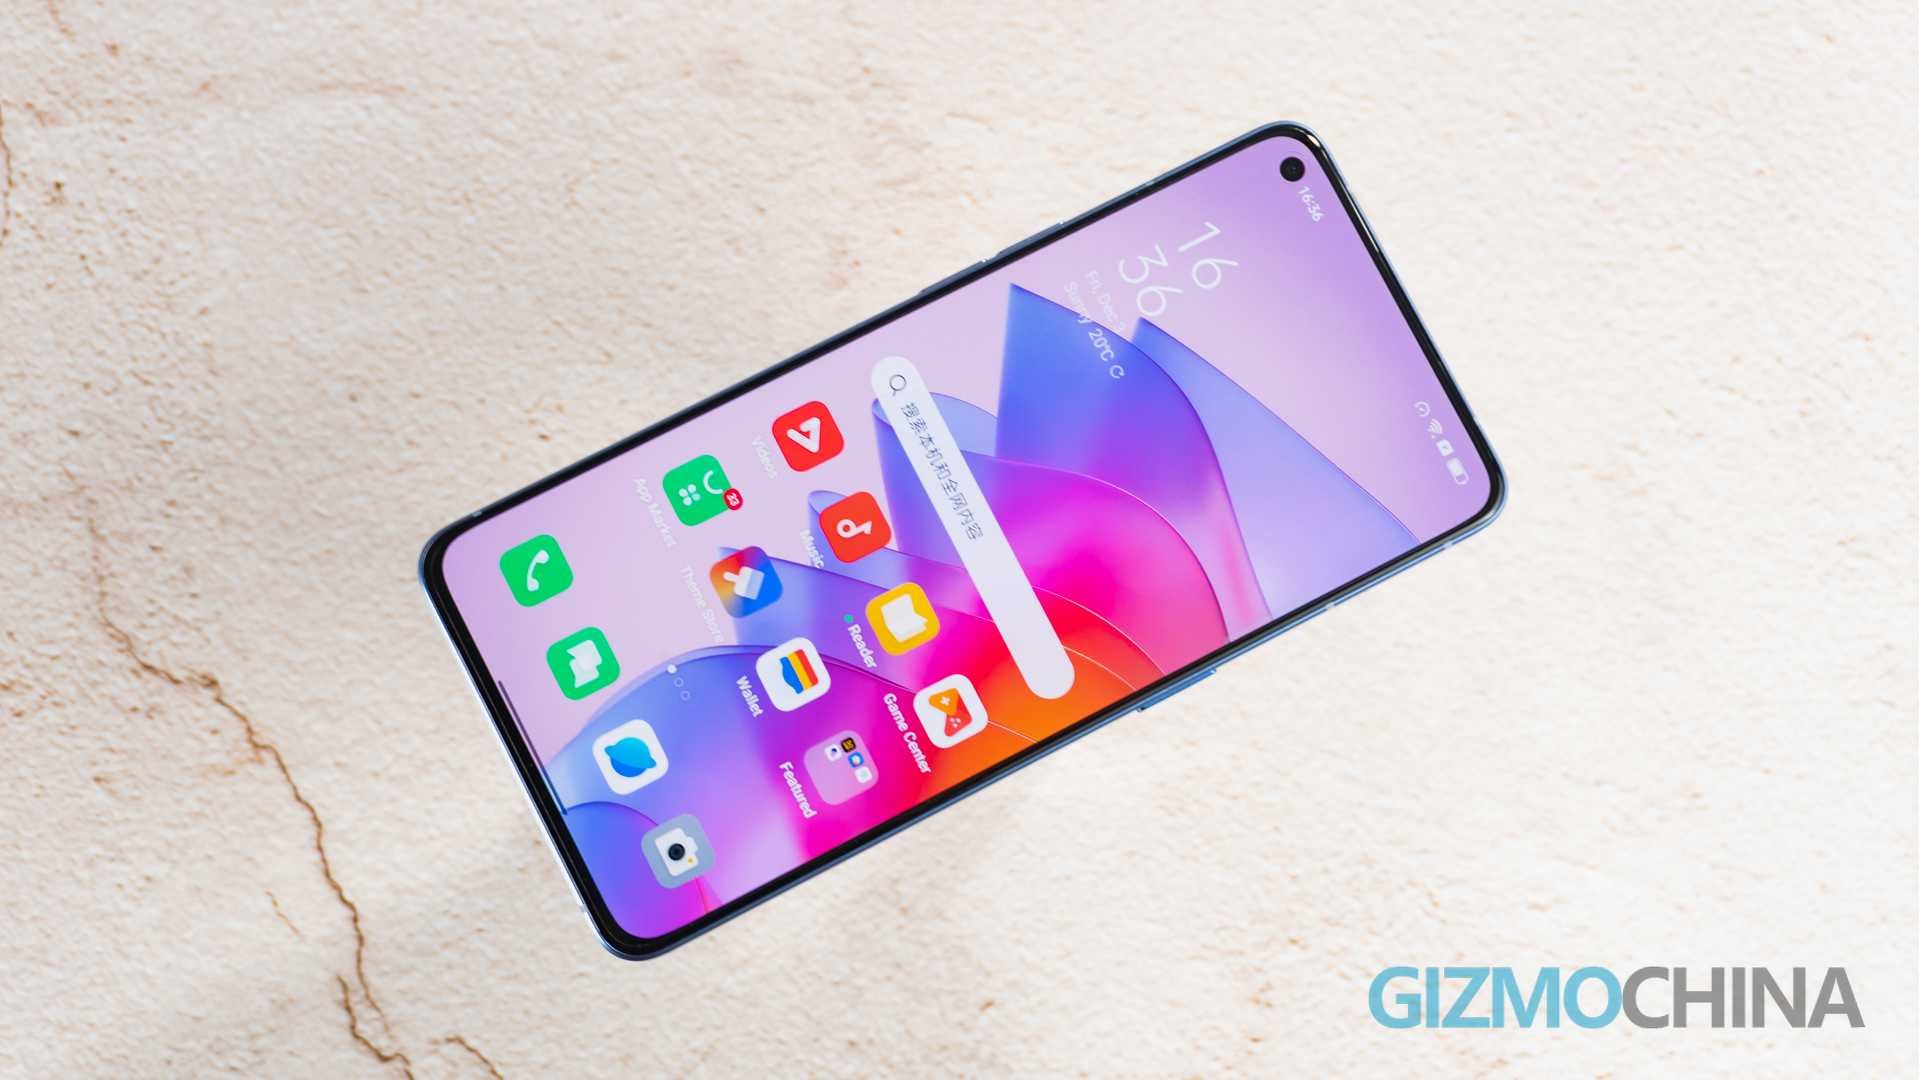 OPPO Reno 7 Pro review: Stylish design, questionable value